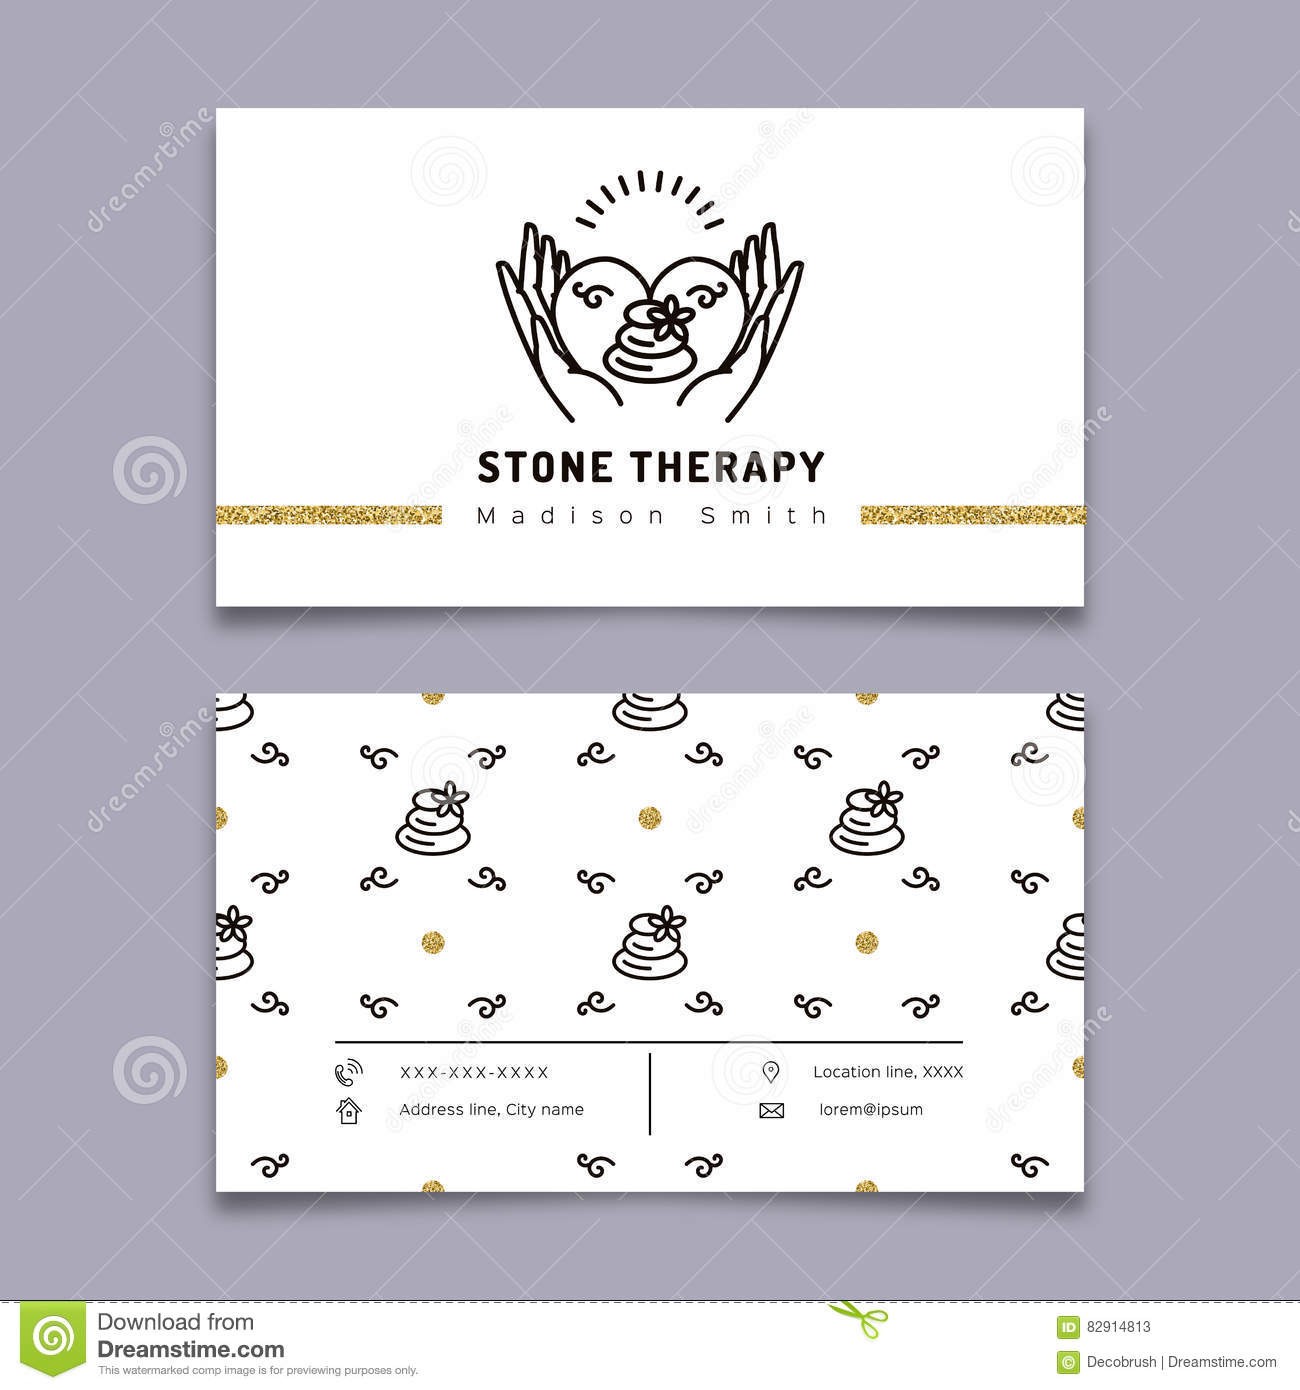 Stone Therapy Business Card. Massage, Beauty Spa, Relax With Massage Therapy Business Card Templates